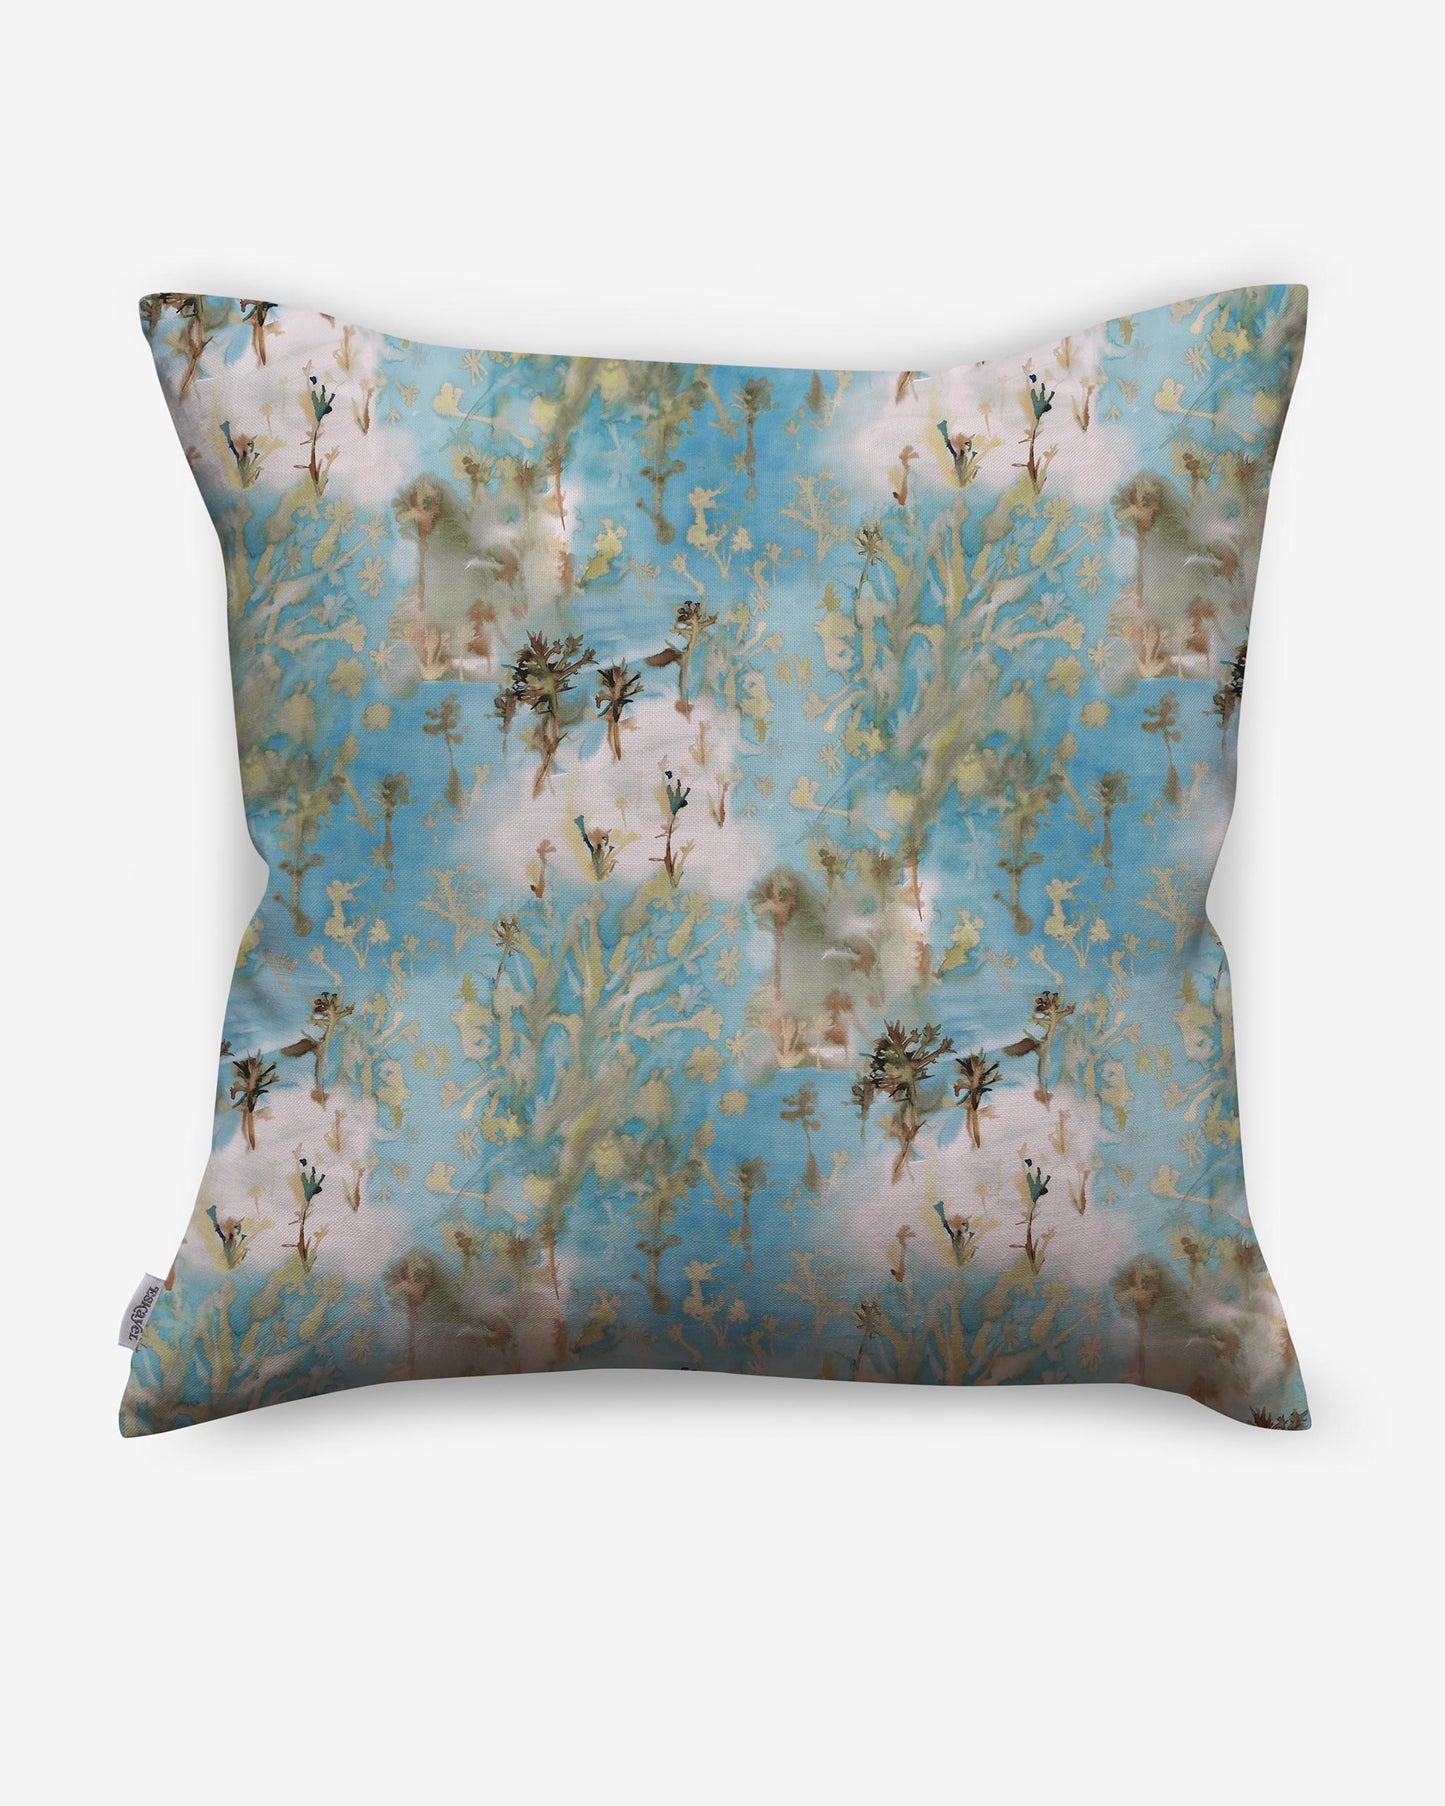 Product Description: A Morea pillow with a blue and gold floral pattern